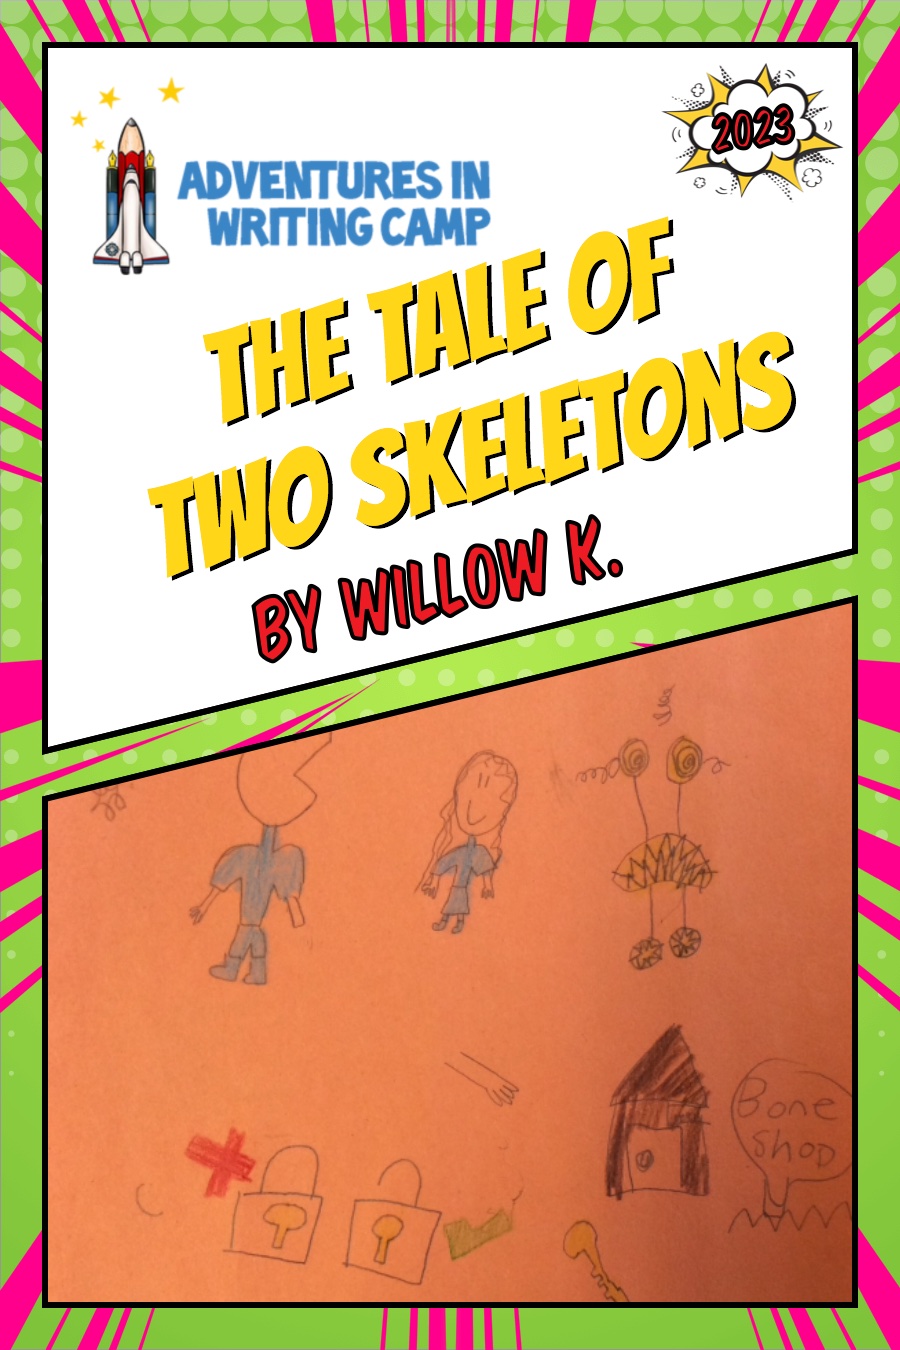 The Tale of Two Skeletons by Willow K